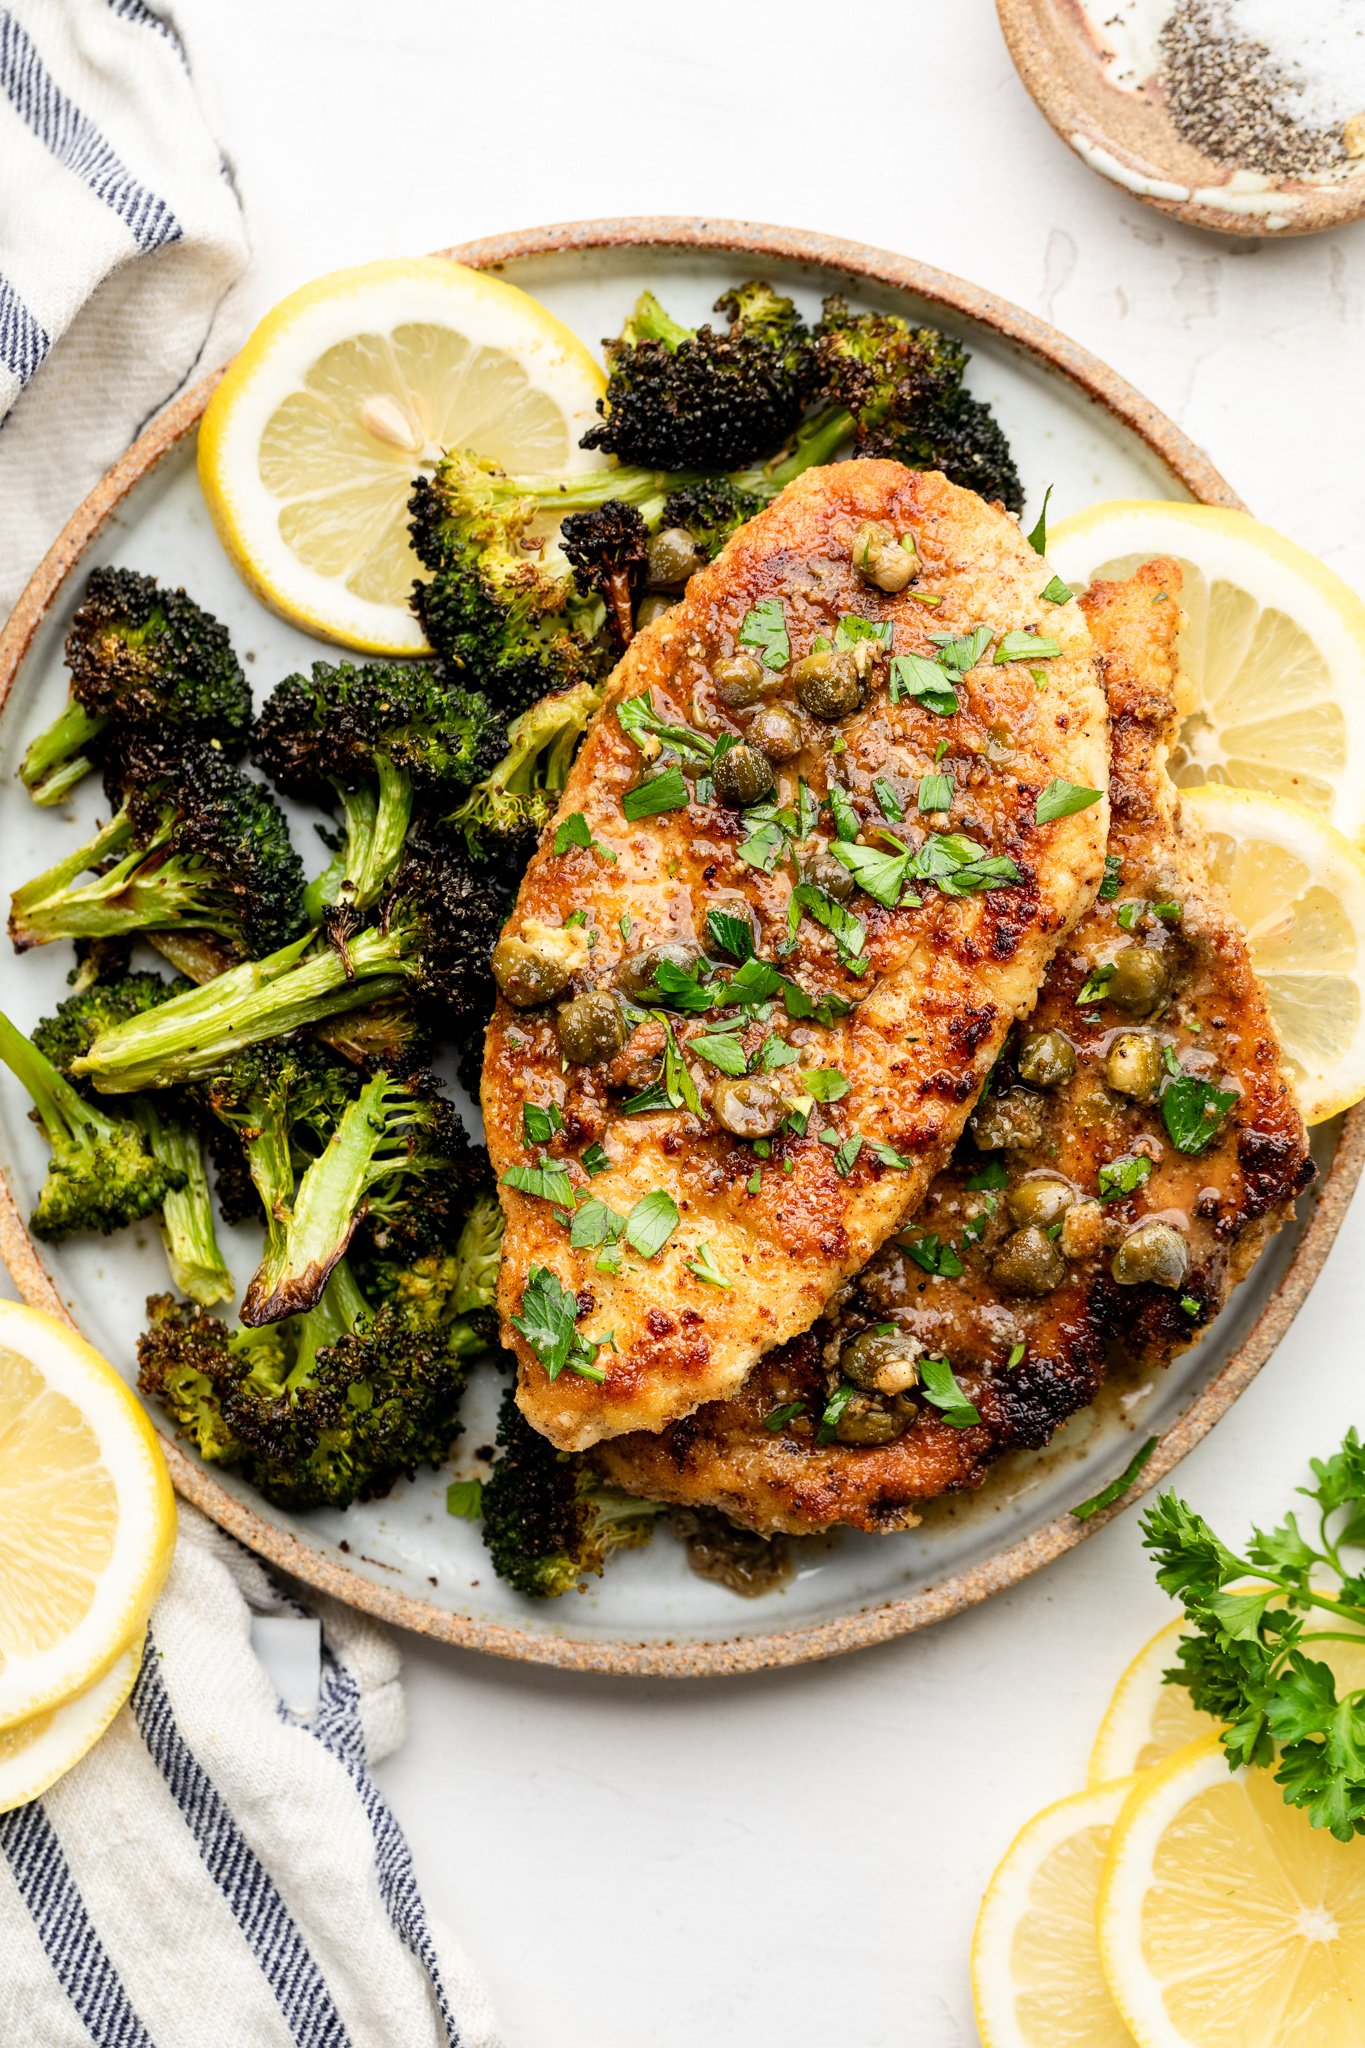 A tan and white plate with roasted broccoli, gluten free chicken piccata, and lemon slices